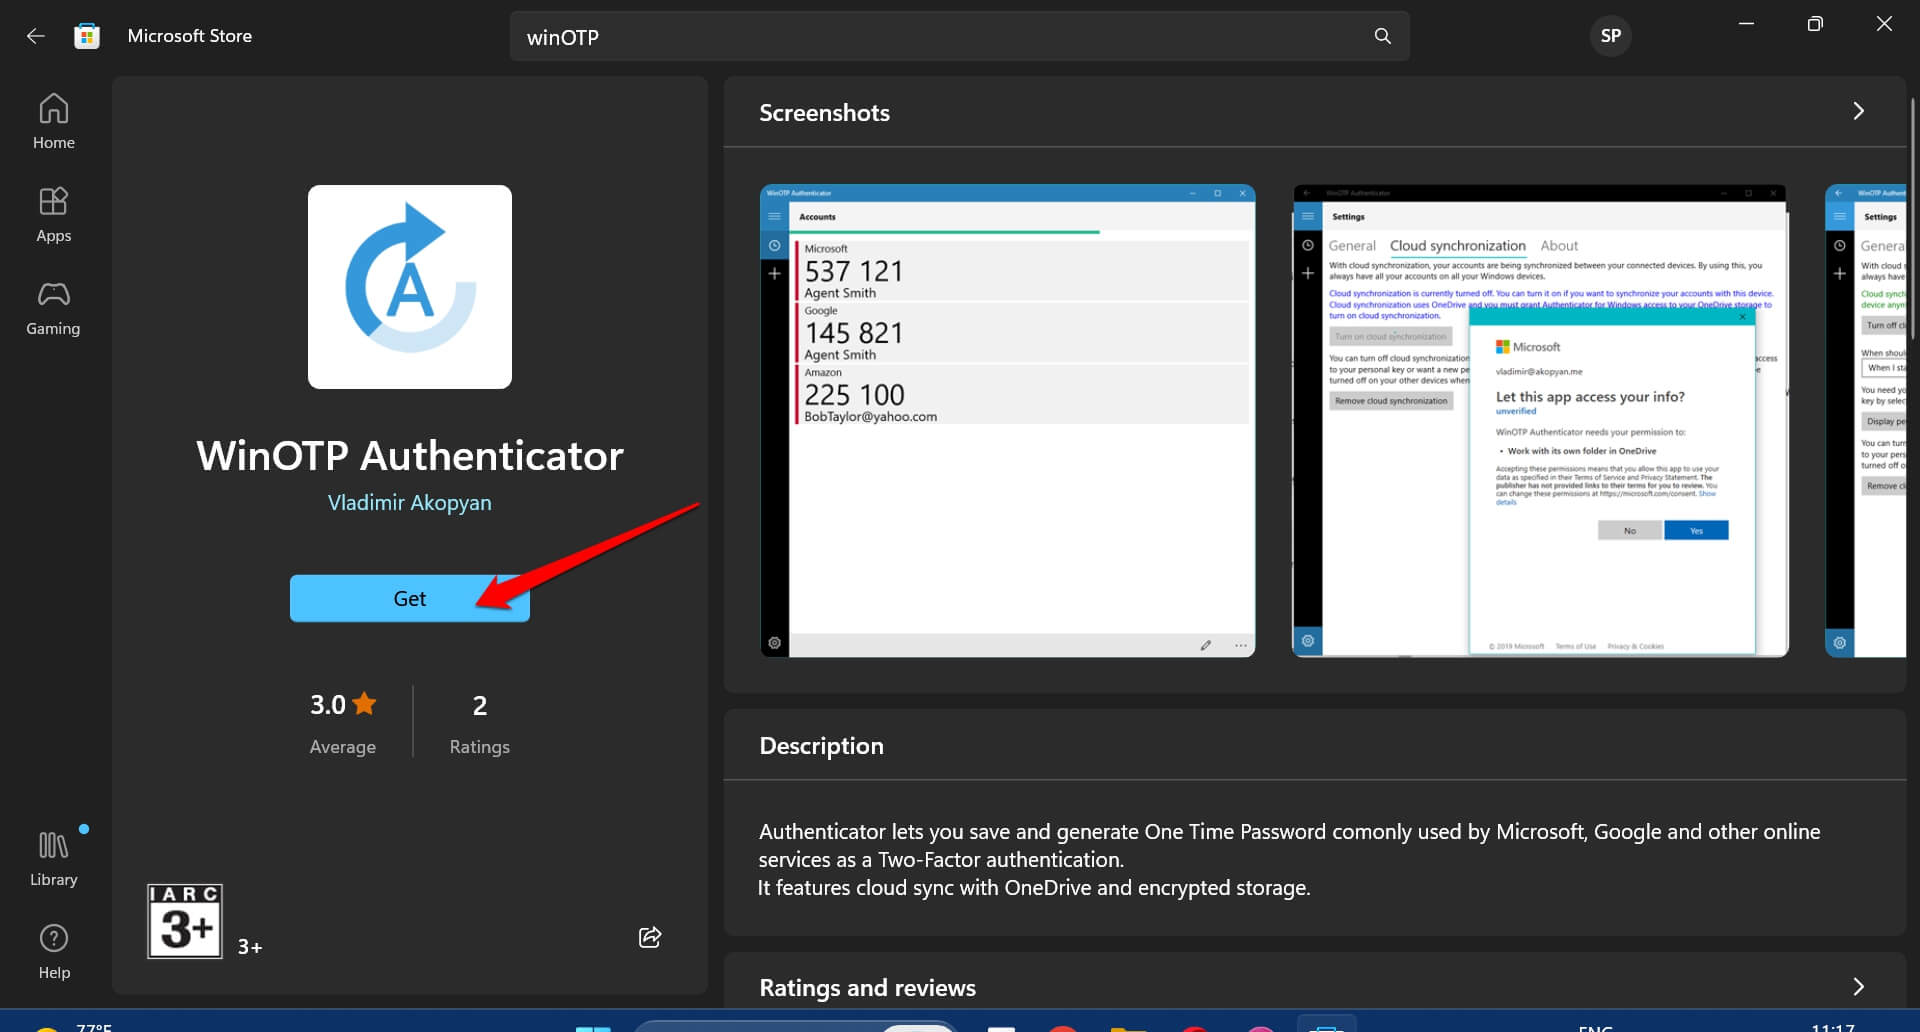 download winOTP authenticator for Windows